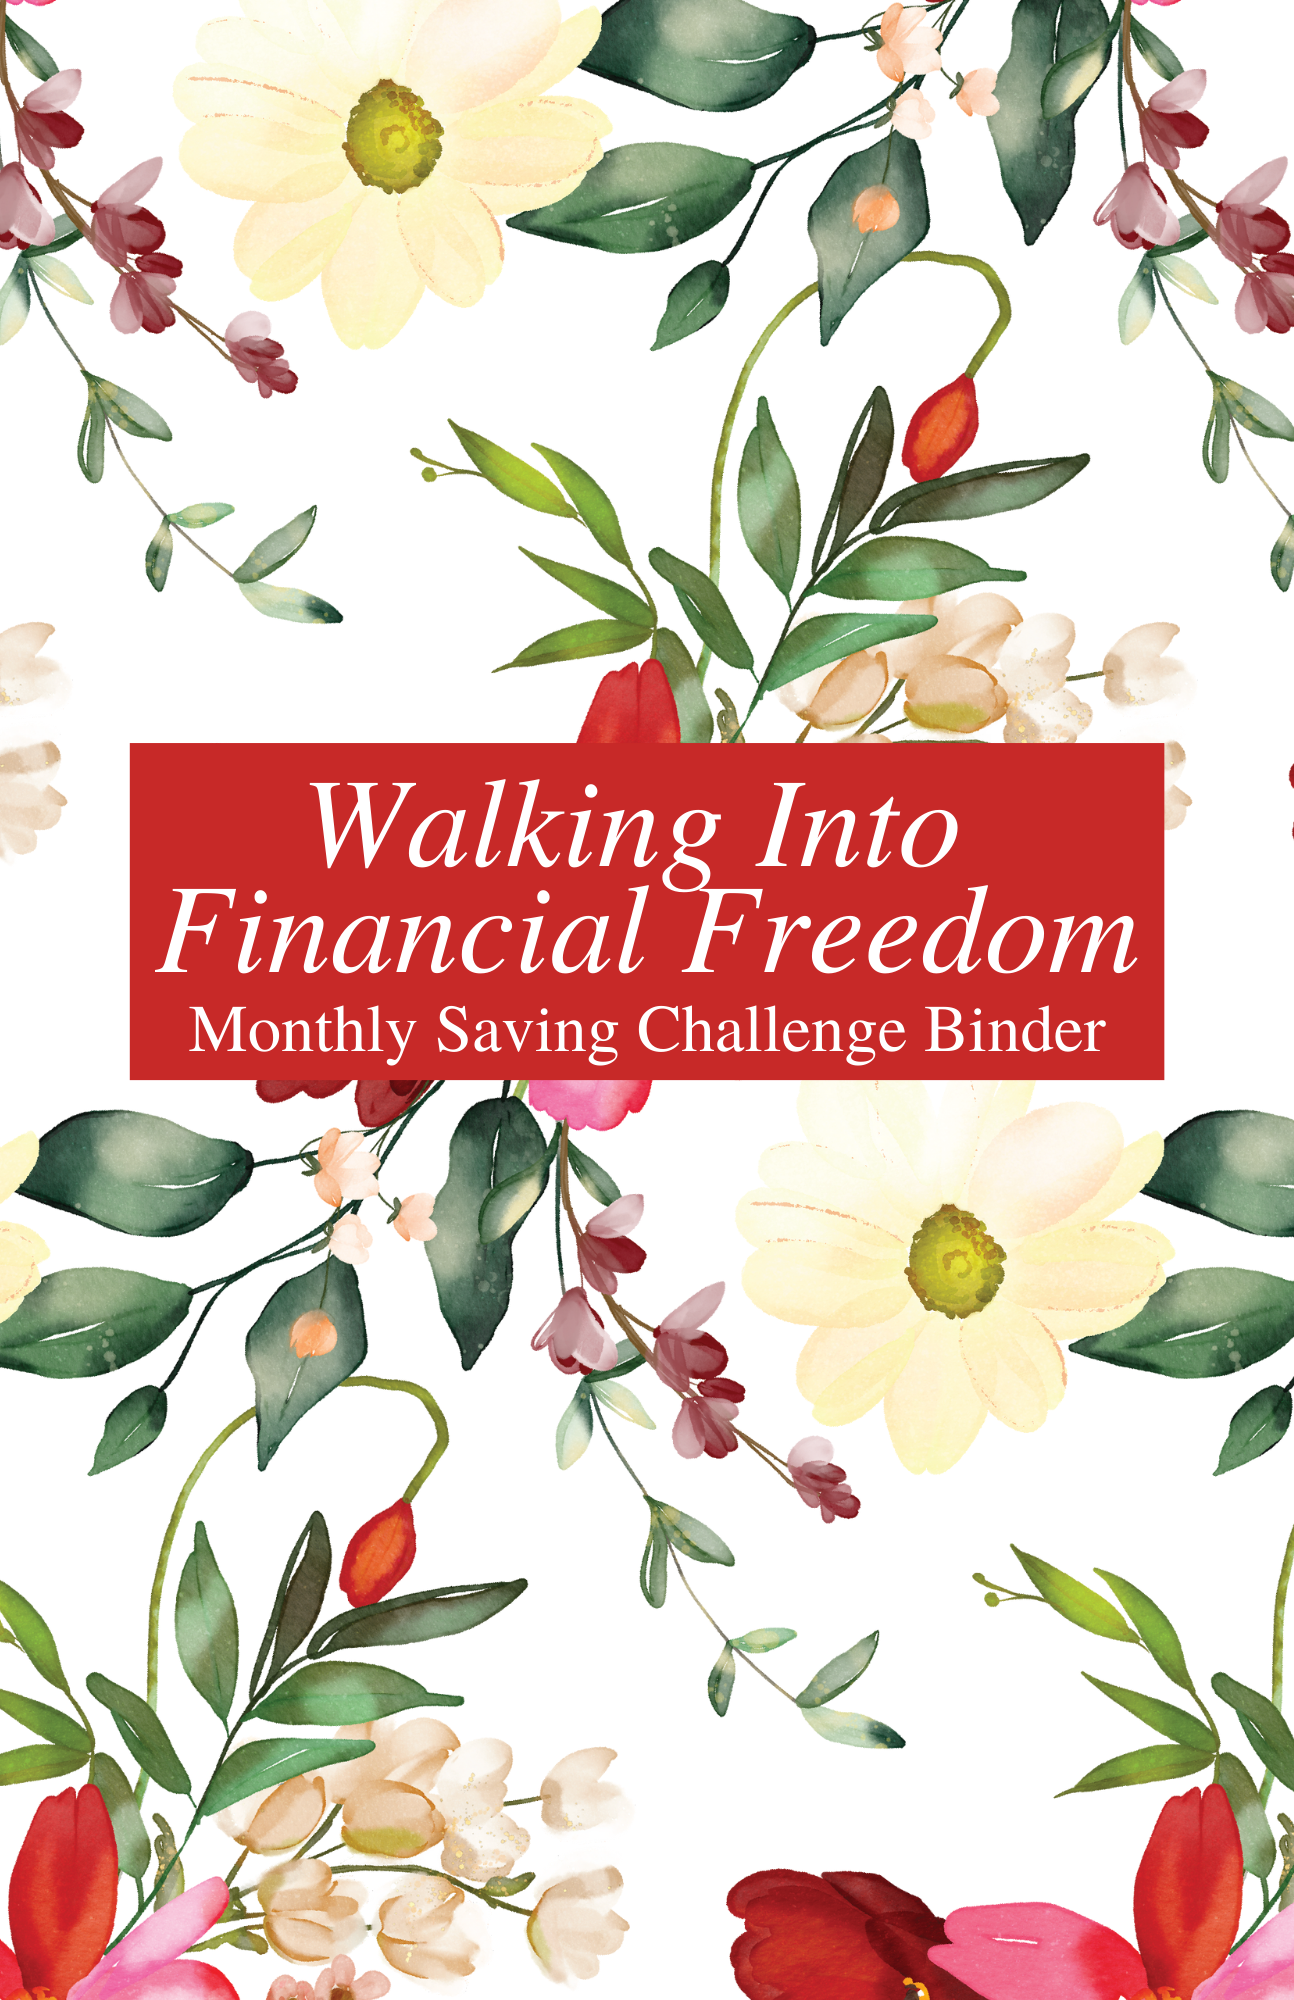 Customized Walking Into Financial Freedom - Monthly Saving Challenge Binder